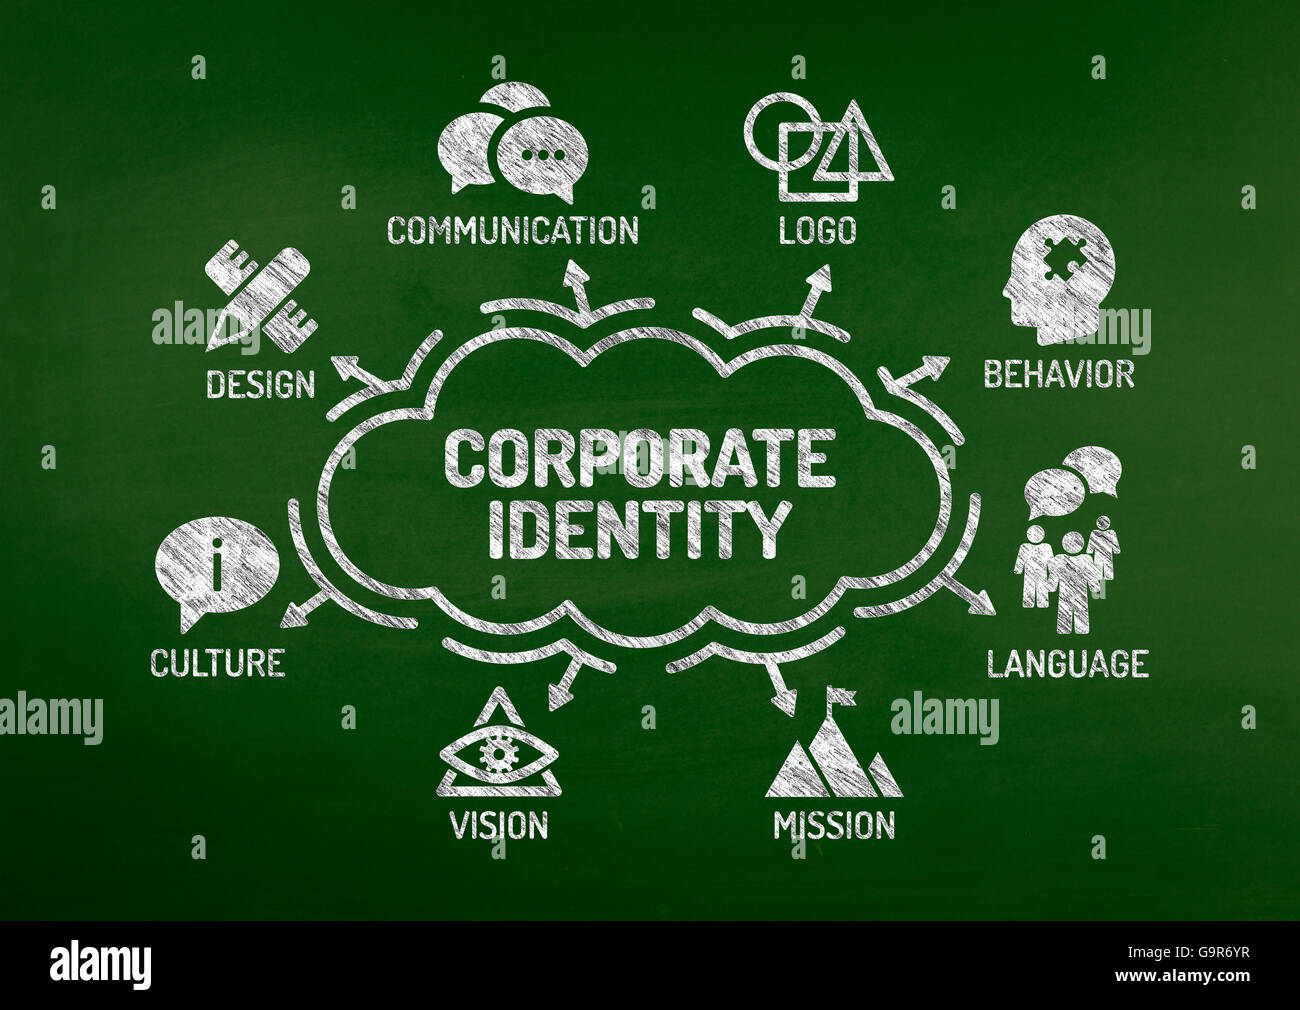 corporate-identity-chart-with-keywords-and-icons-on-blackboard-stock